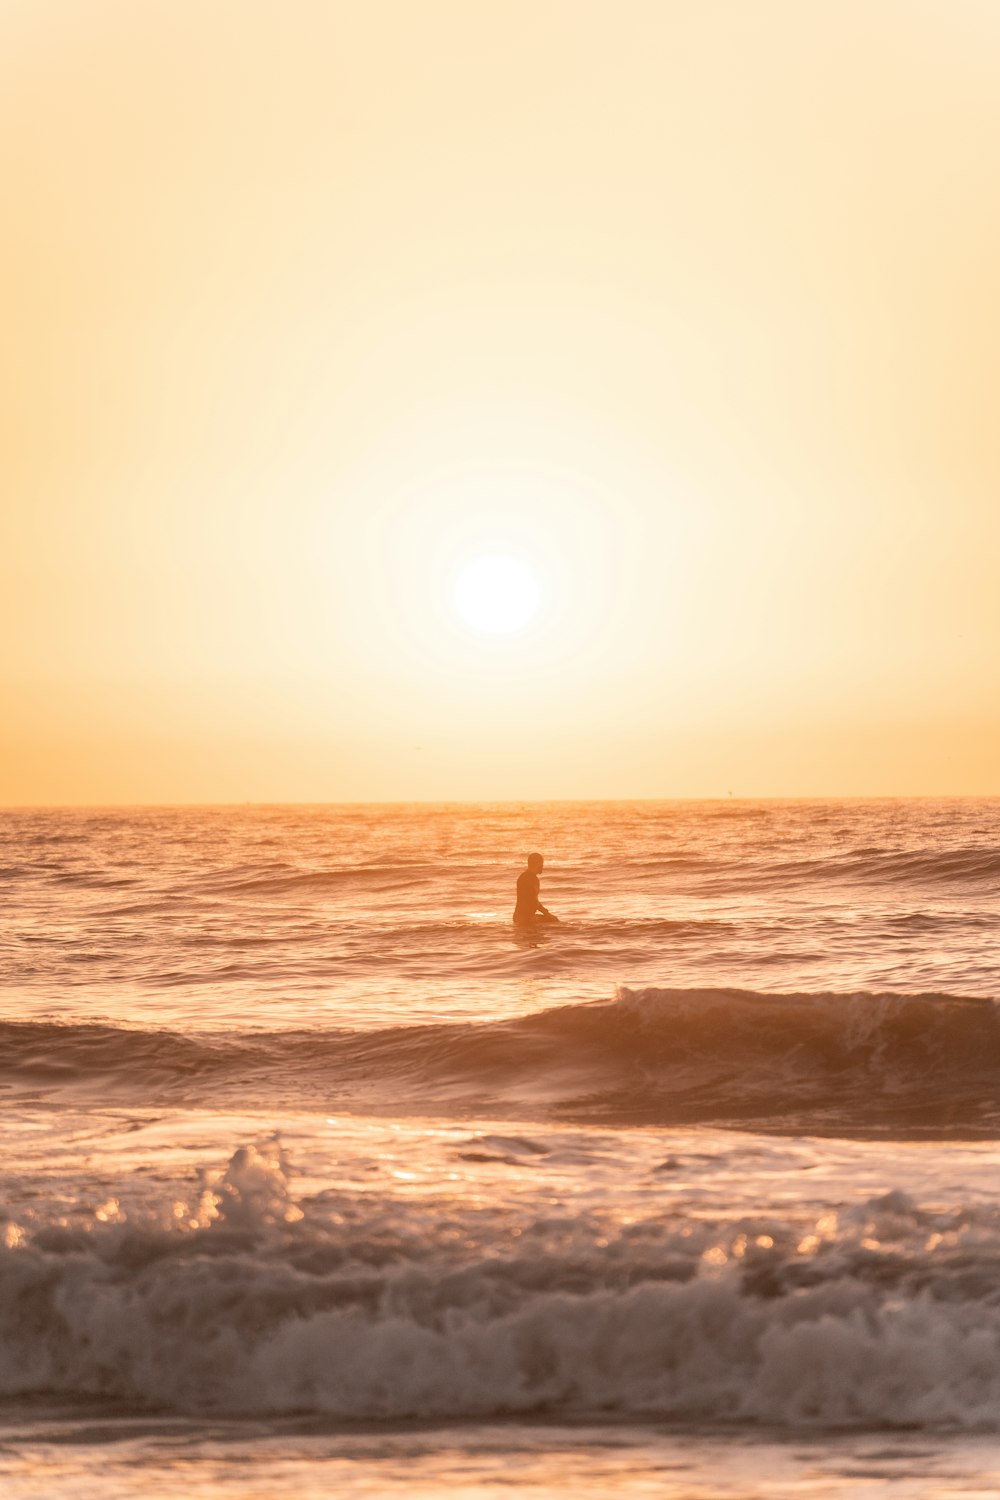 a person surfing in the sea